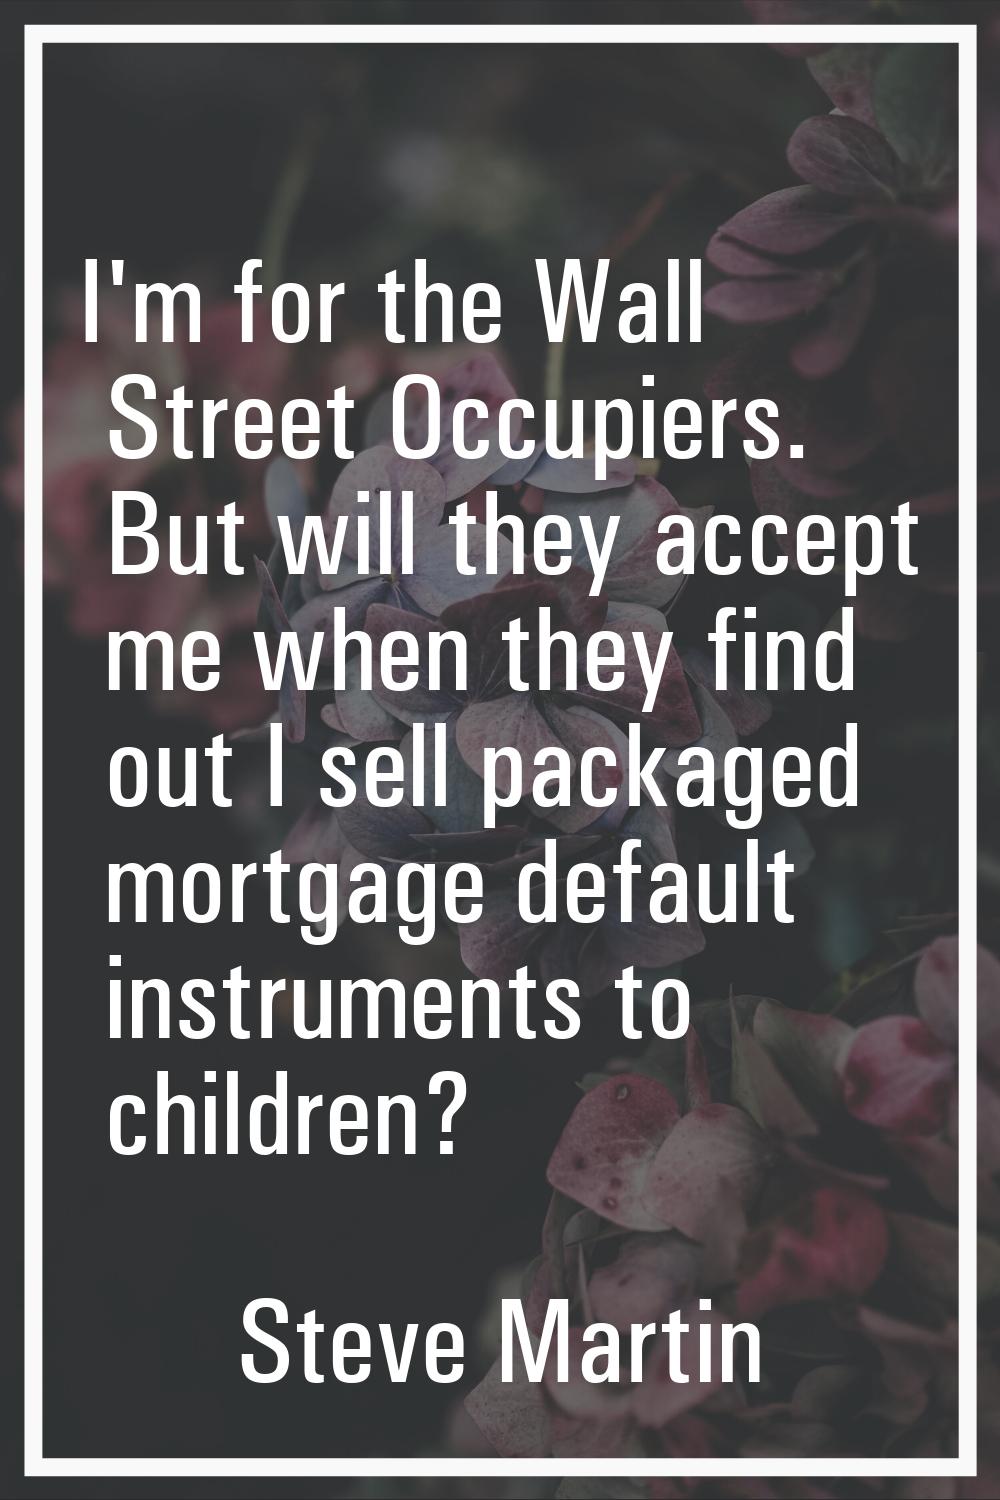 I'm for the Wall Street Occupiers. But will they accept me when they find out I sell packaged mortg